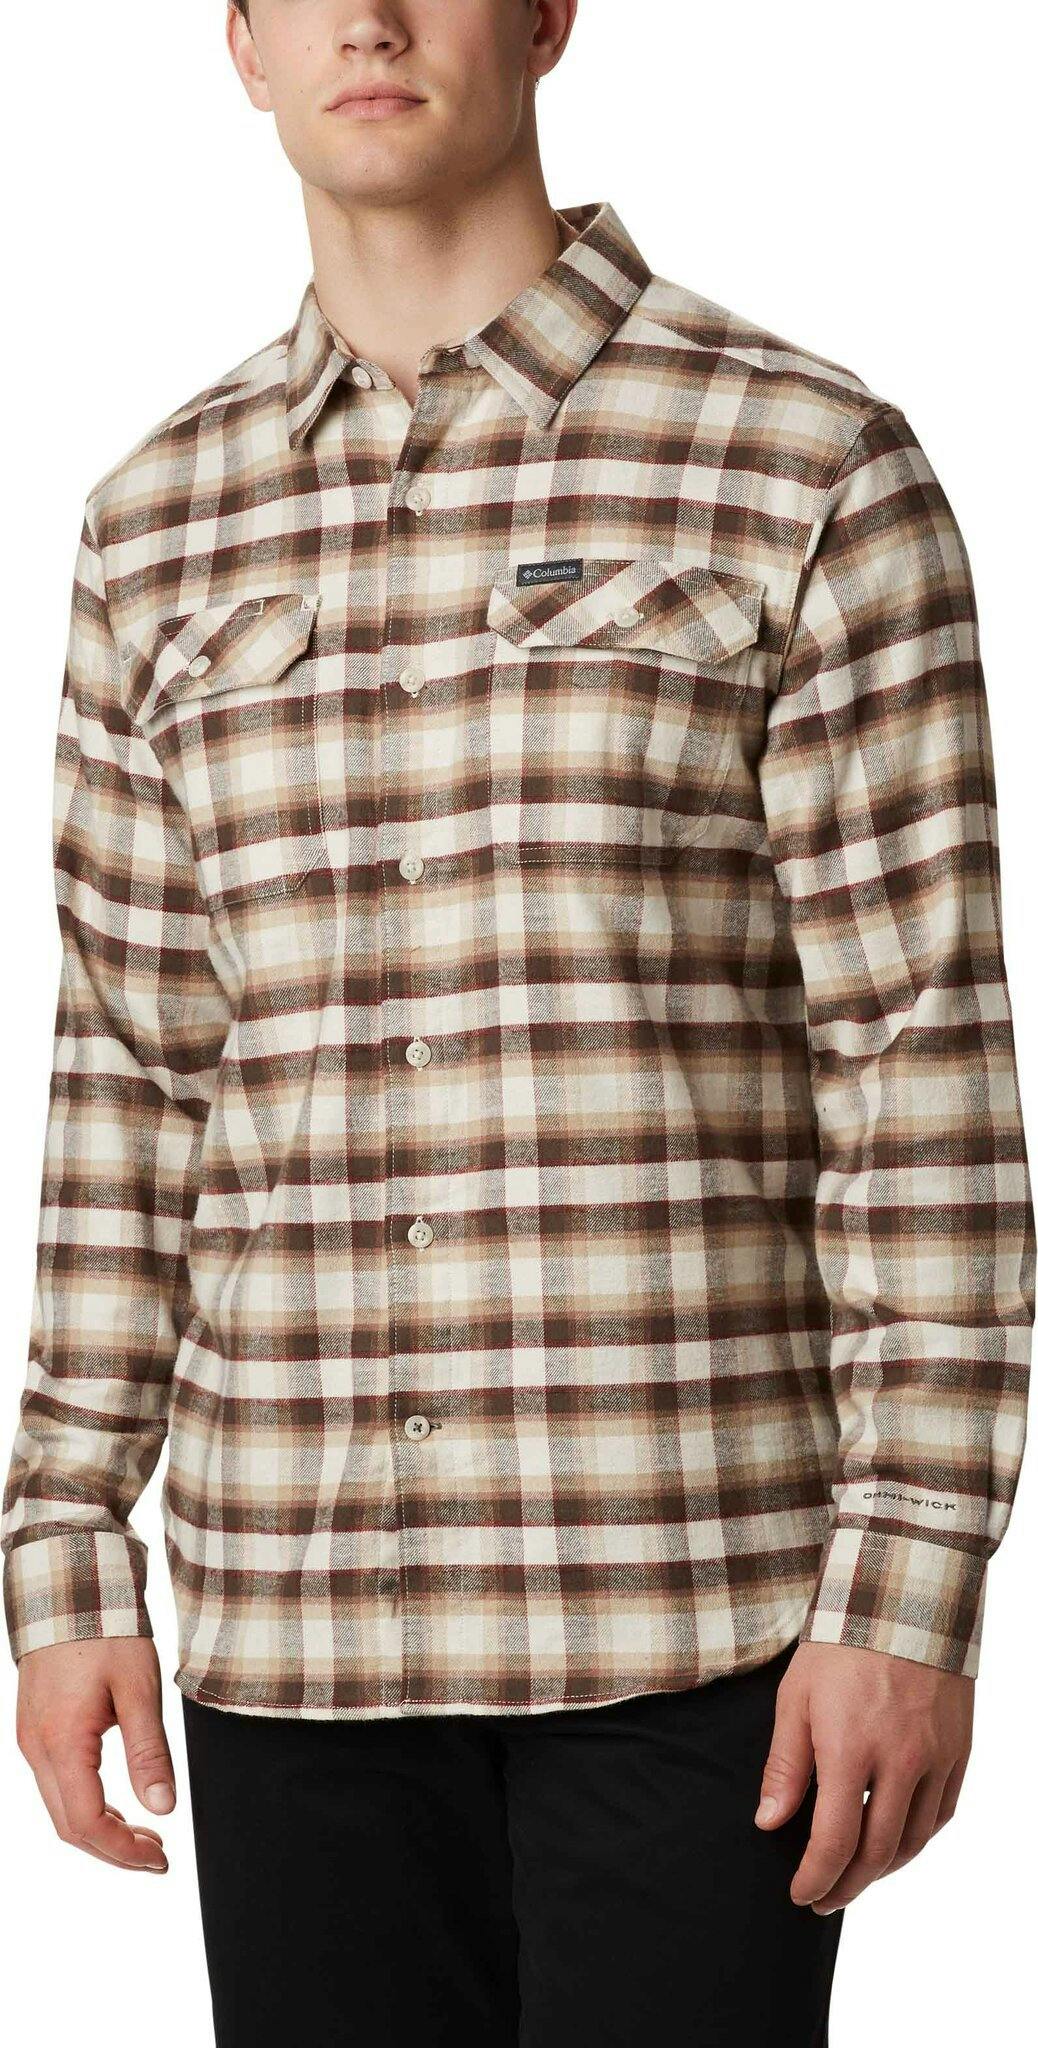 Product image for Flare Gun Stretch Flannel Shirt Big Size - Men's